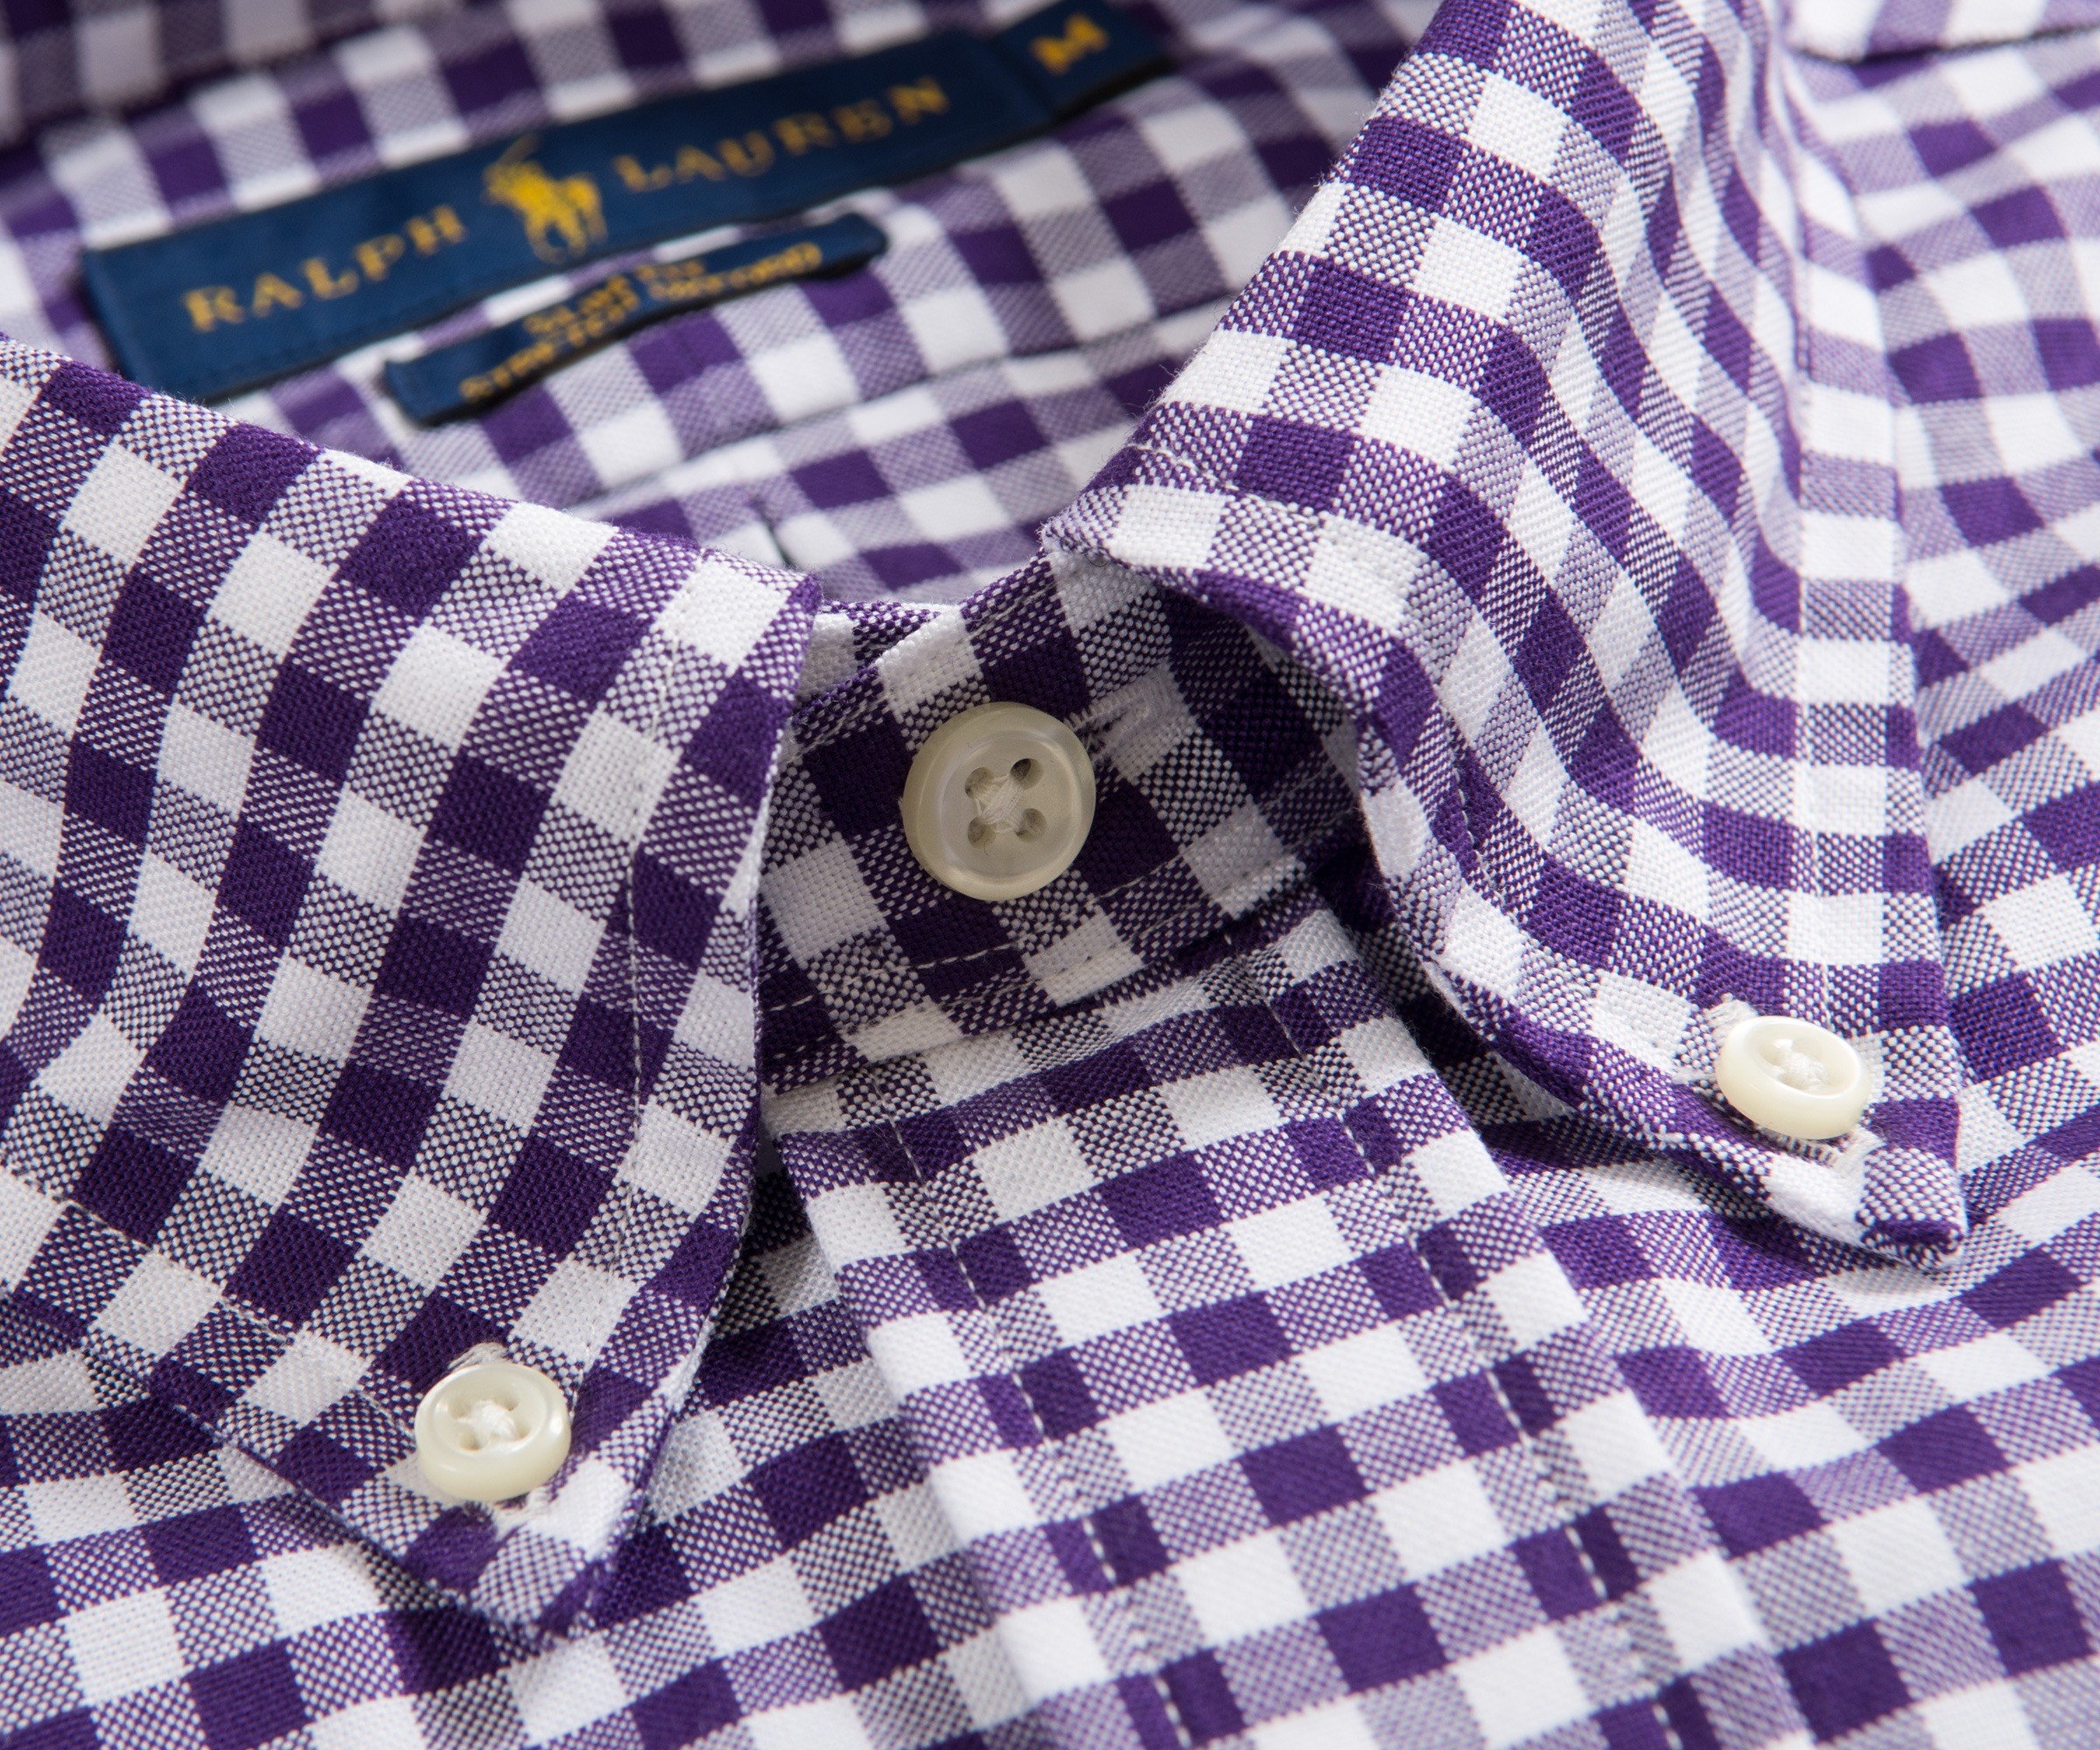 Polo Ralph Lauren Slim Fit Stretch Oxford Large Gingham Shirt Purple/White